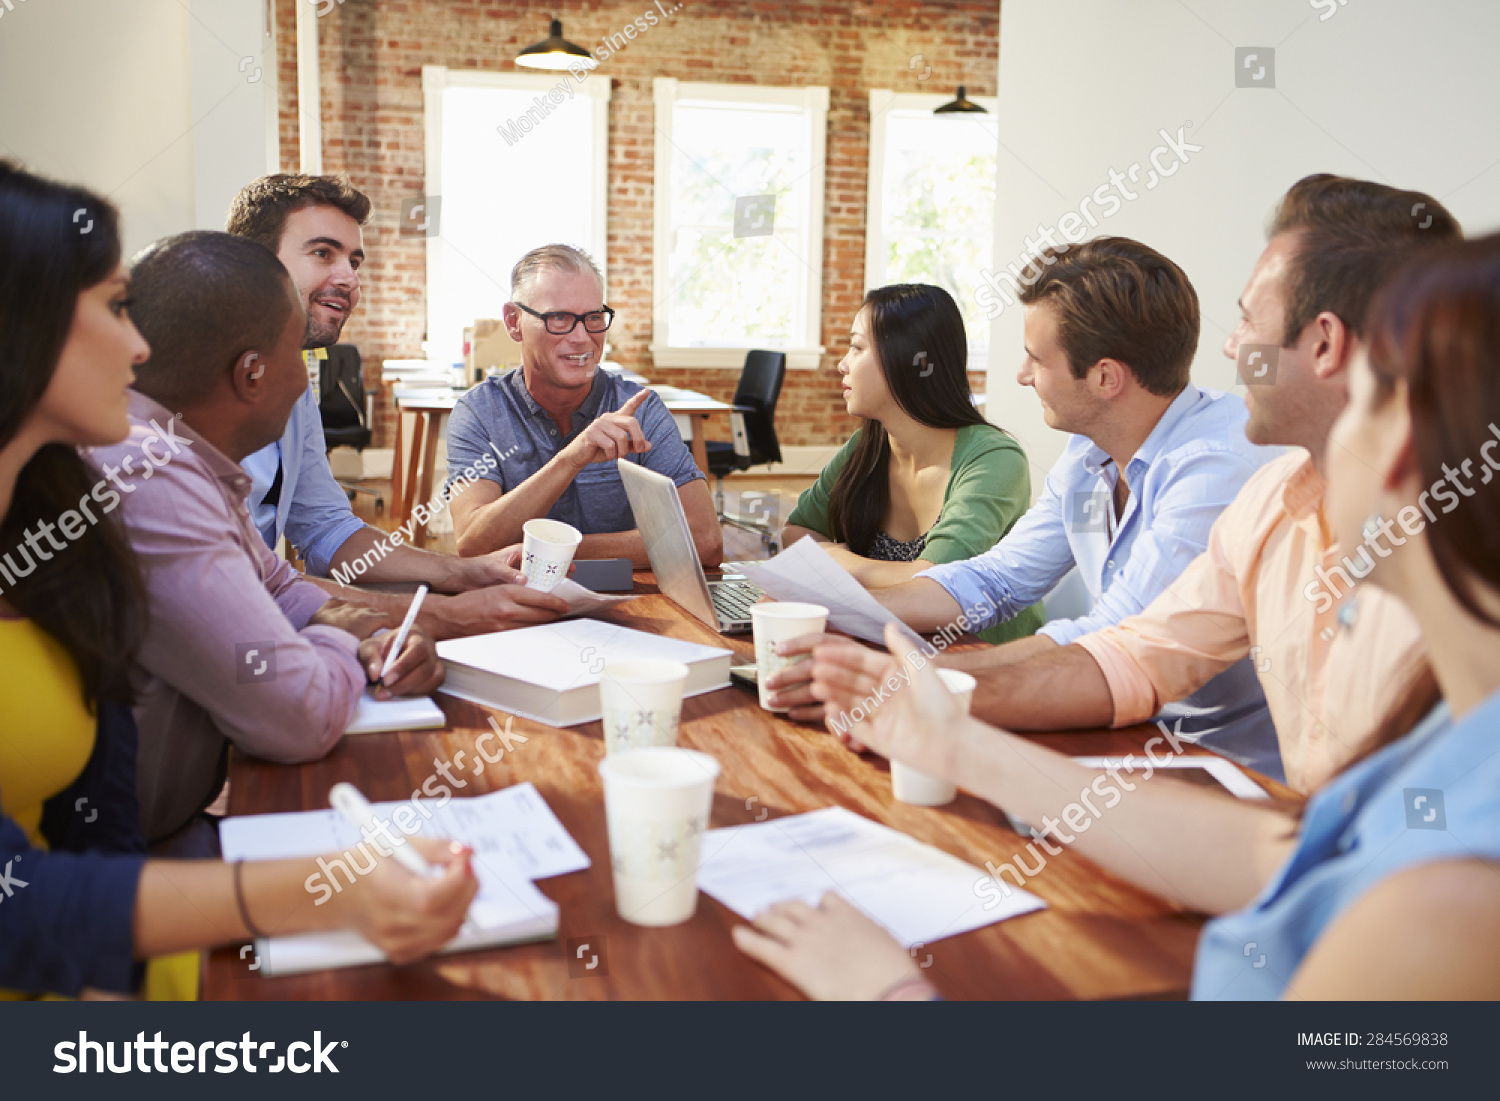 Group Of Office Workers Meeting To Discuss Ideas #284569838